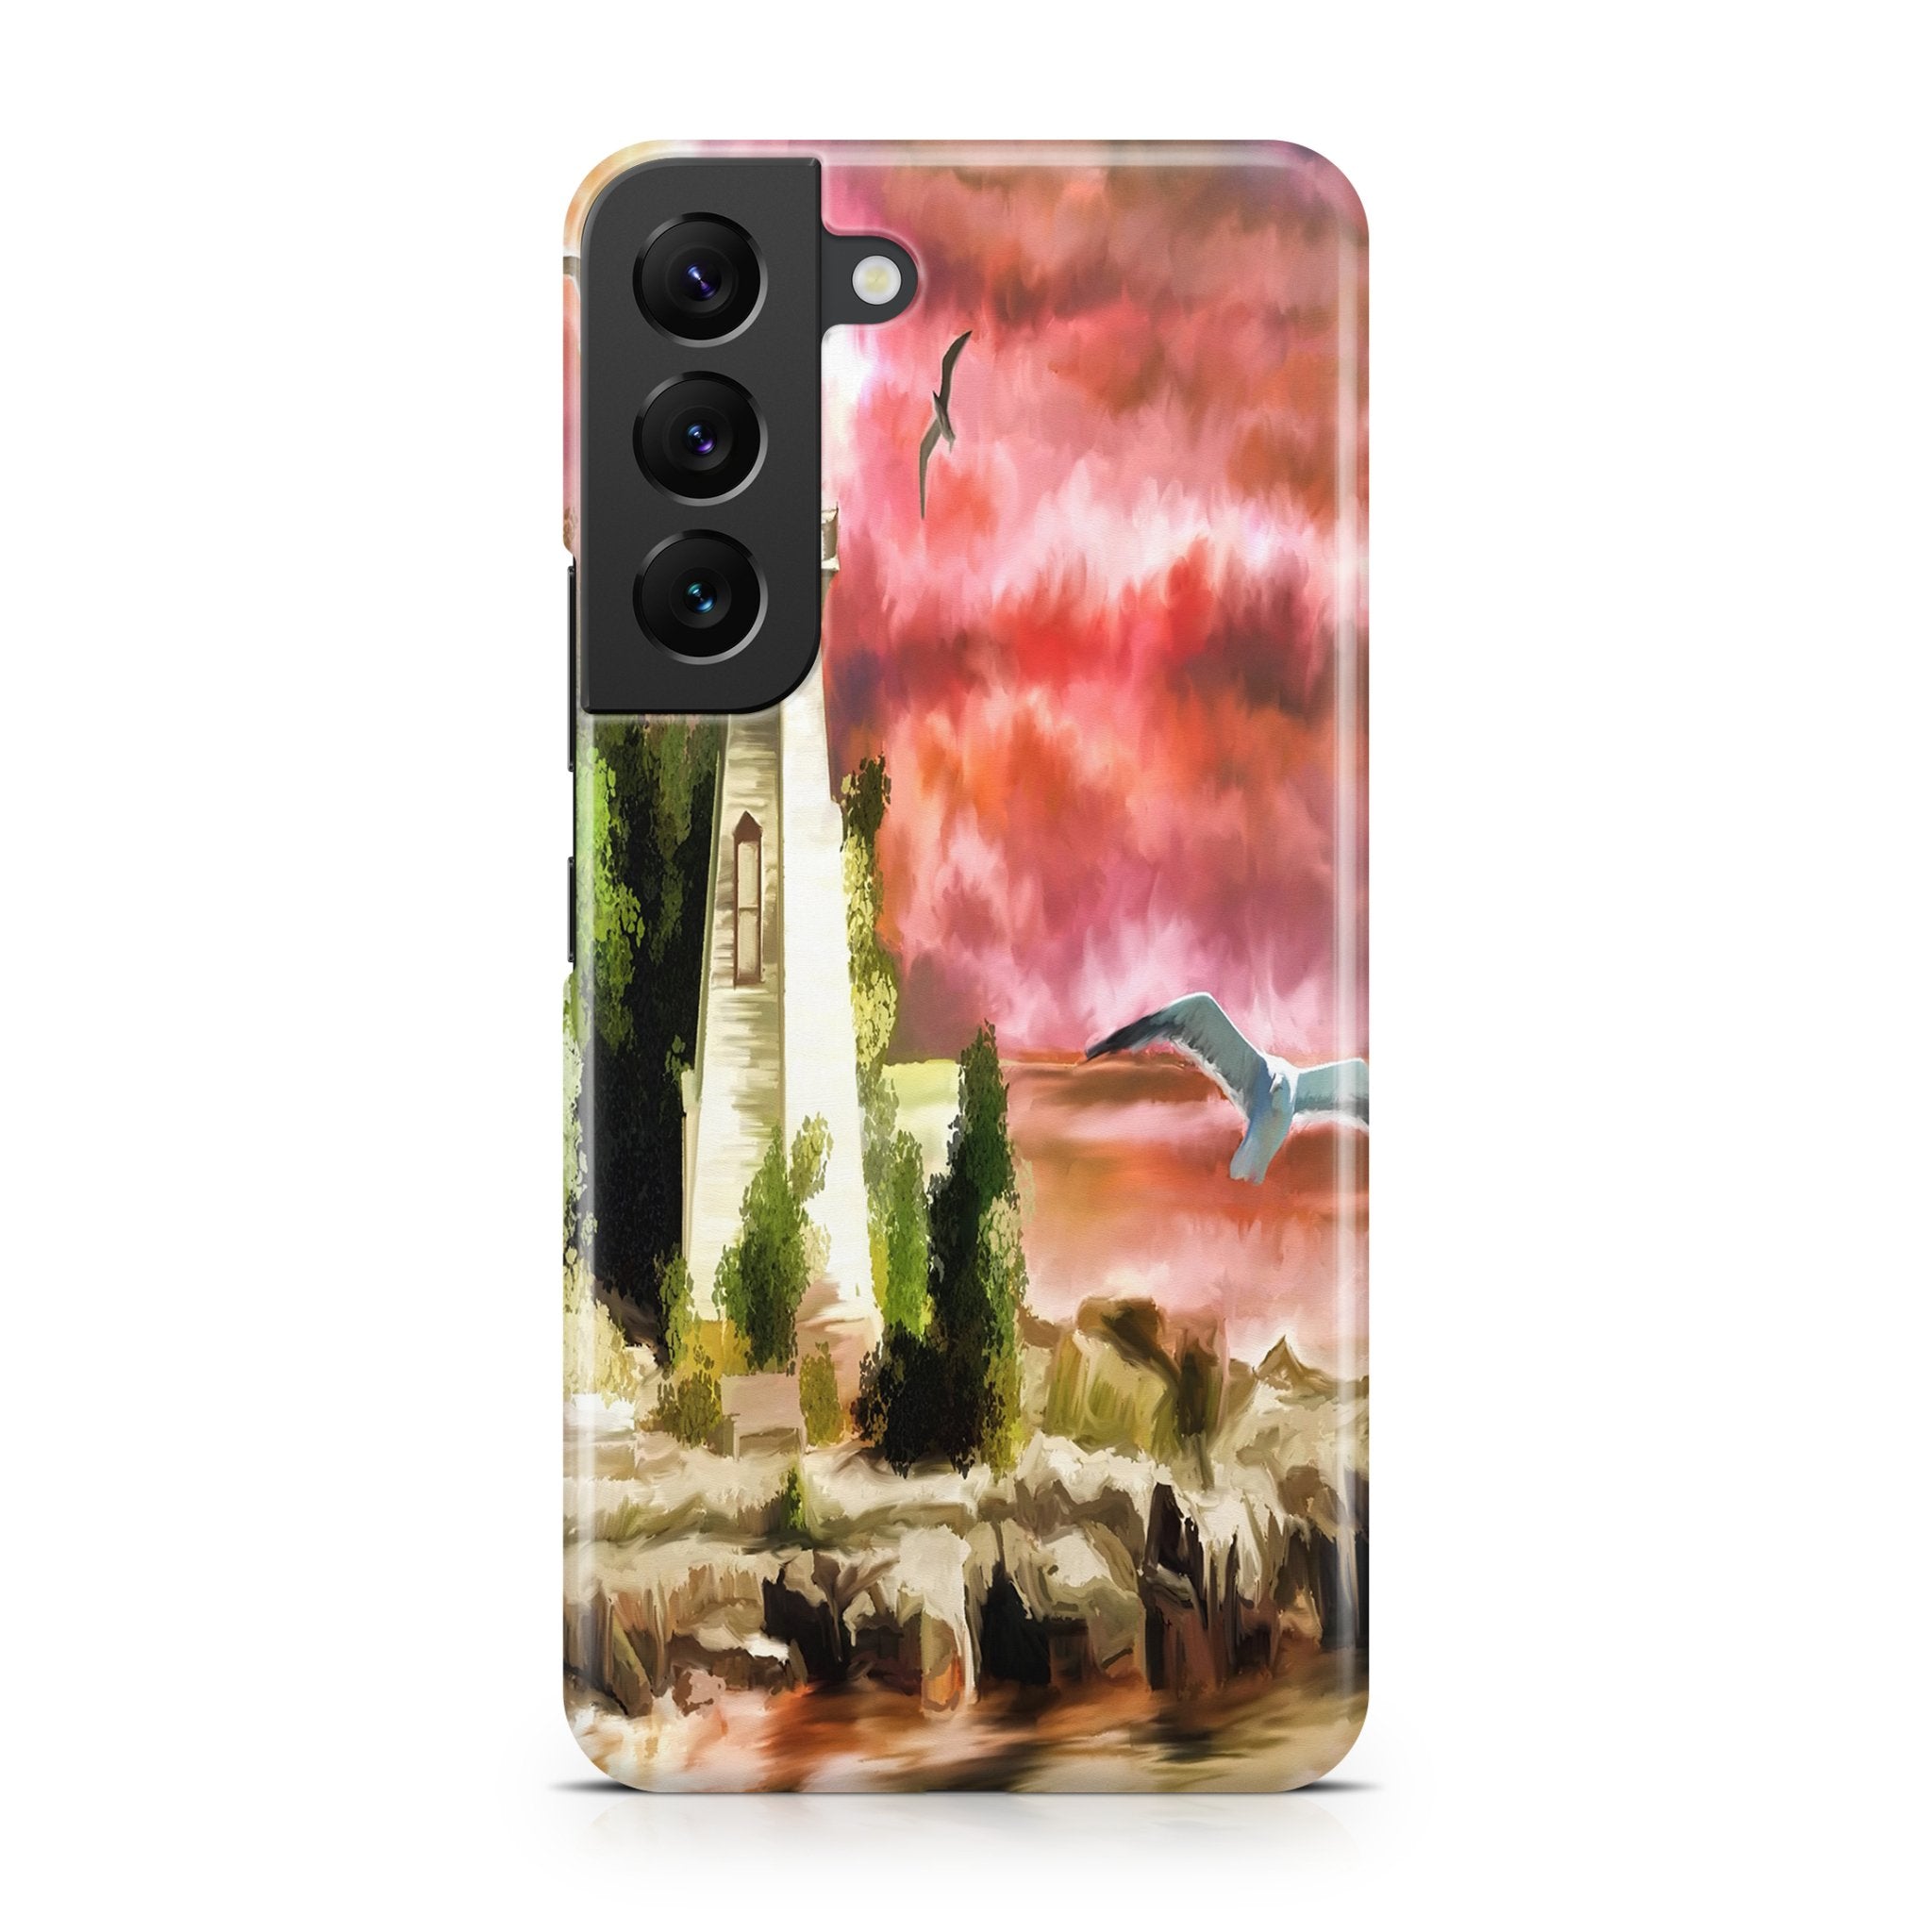 Lighthouse - Samsung phone case designs by CaseSwagger